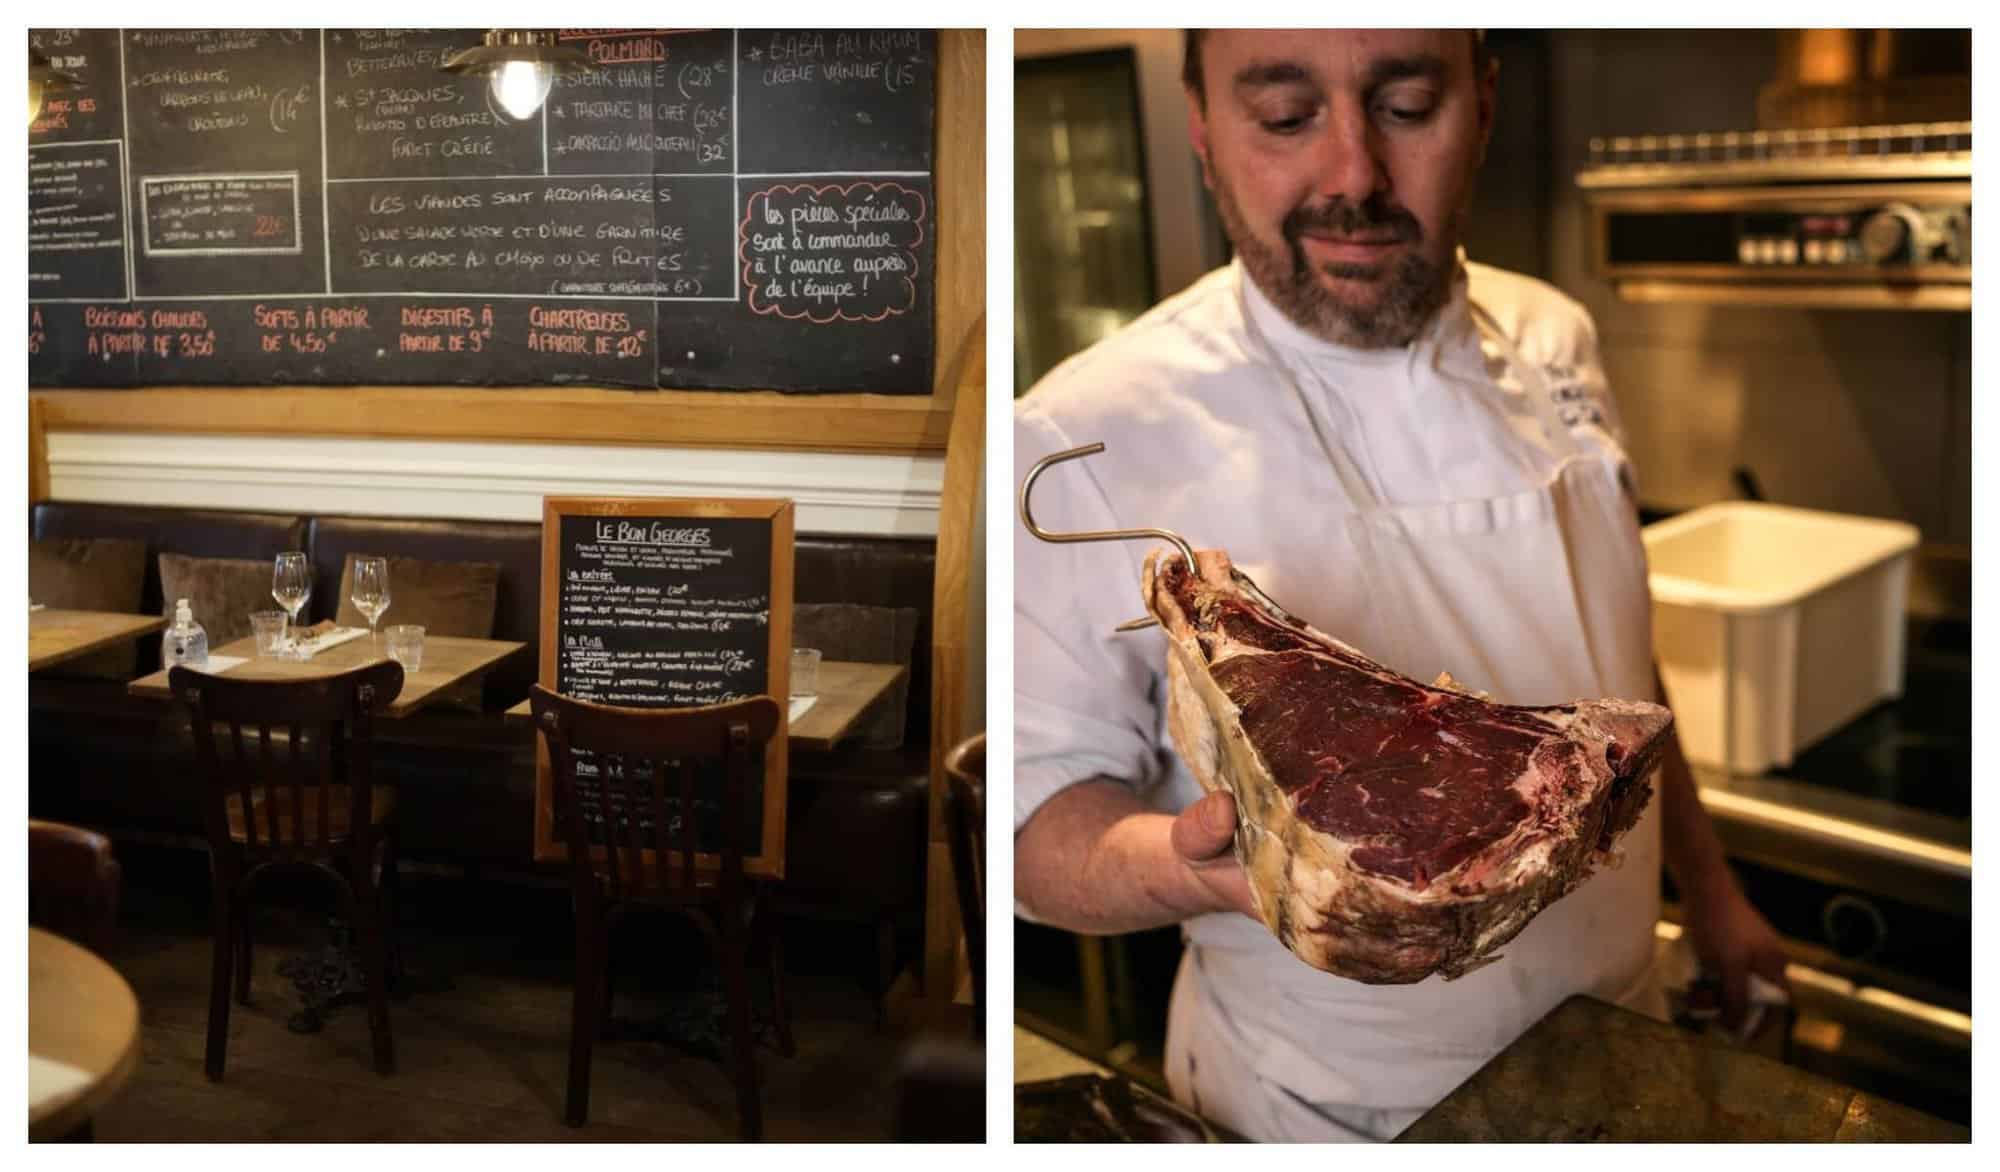 Left: A chalk board is displayed inside the main seating area of Le Bon Georges, with the daily food and drink specials written on it. Right: Le Bon Georges' Chef, dressed in chef whites, holds up a cut of beef towards the camera